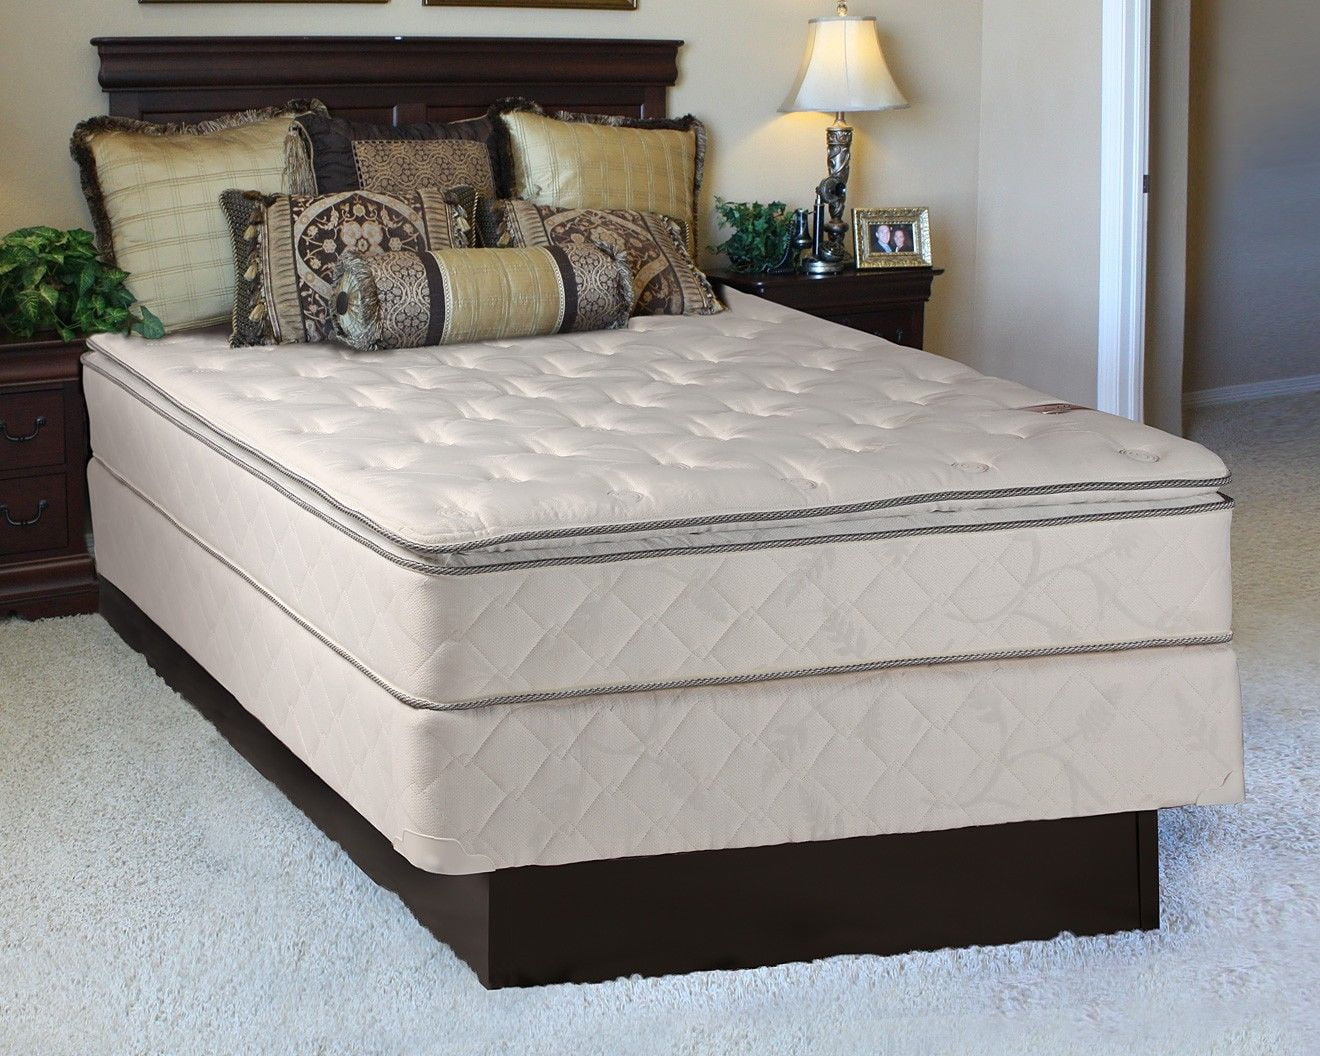 QUEEN Size Mattress 10 Inch Pillow Top Bedroom Spring Support Pain Relief Bed 